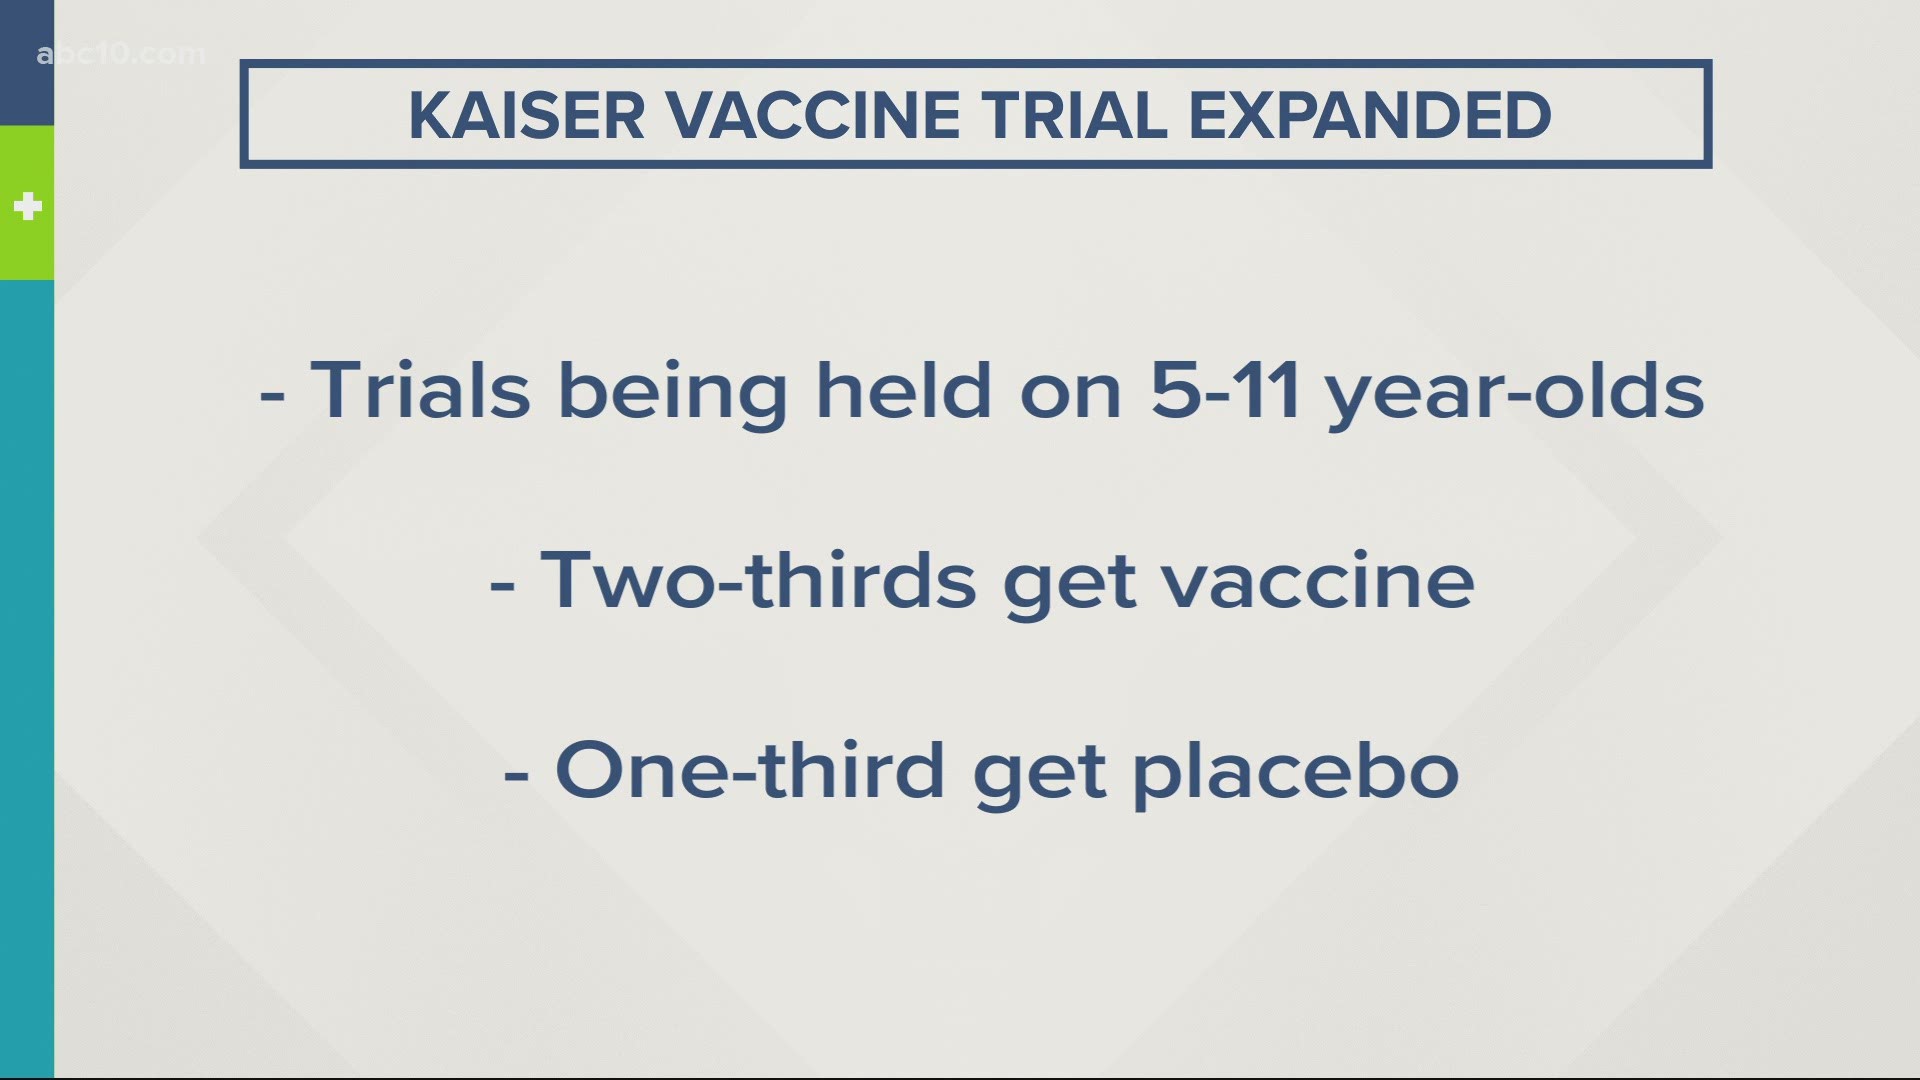 Kaiser Permanente Northern California says the pediatric trial sites are enrolling about 75 children between 5 and 11 years old.